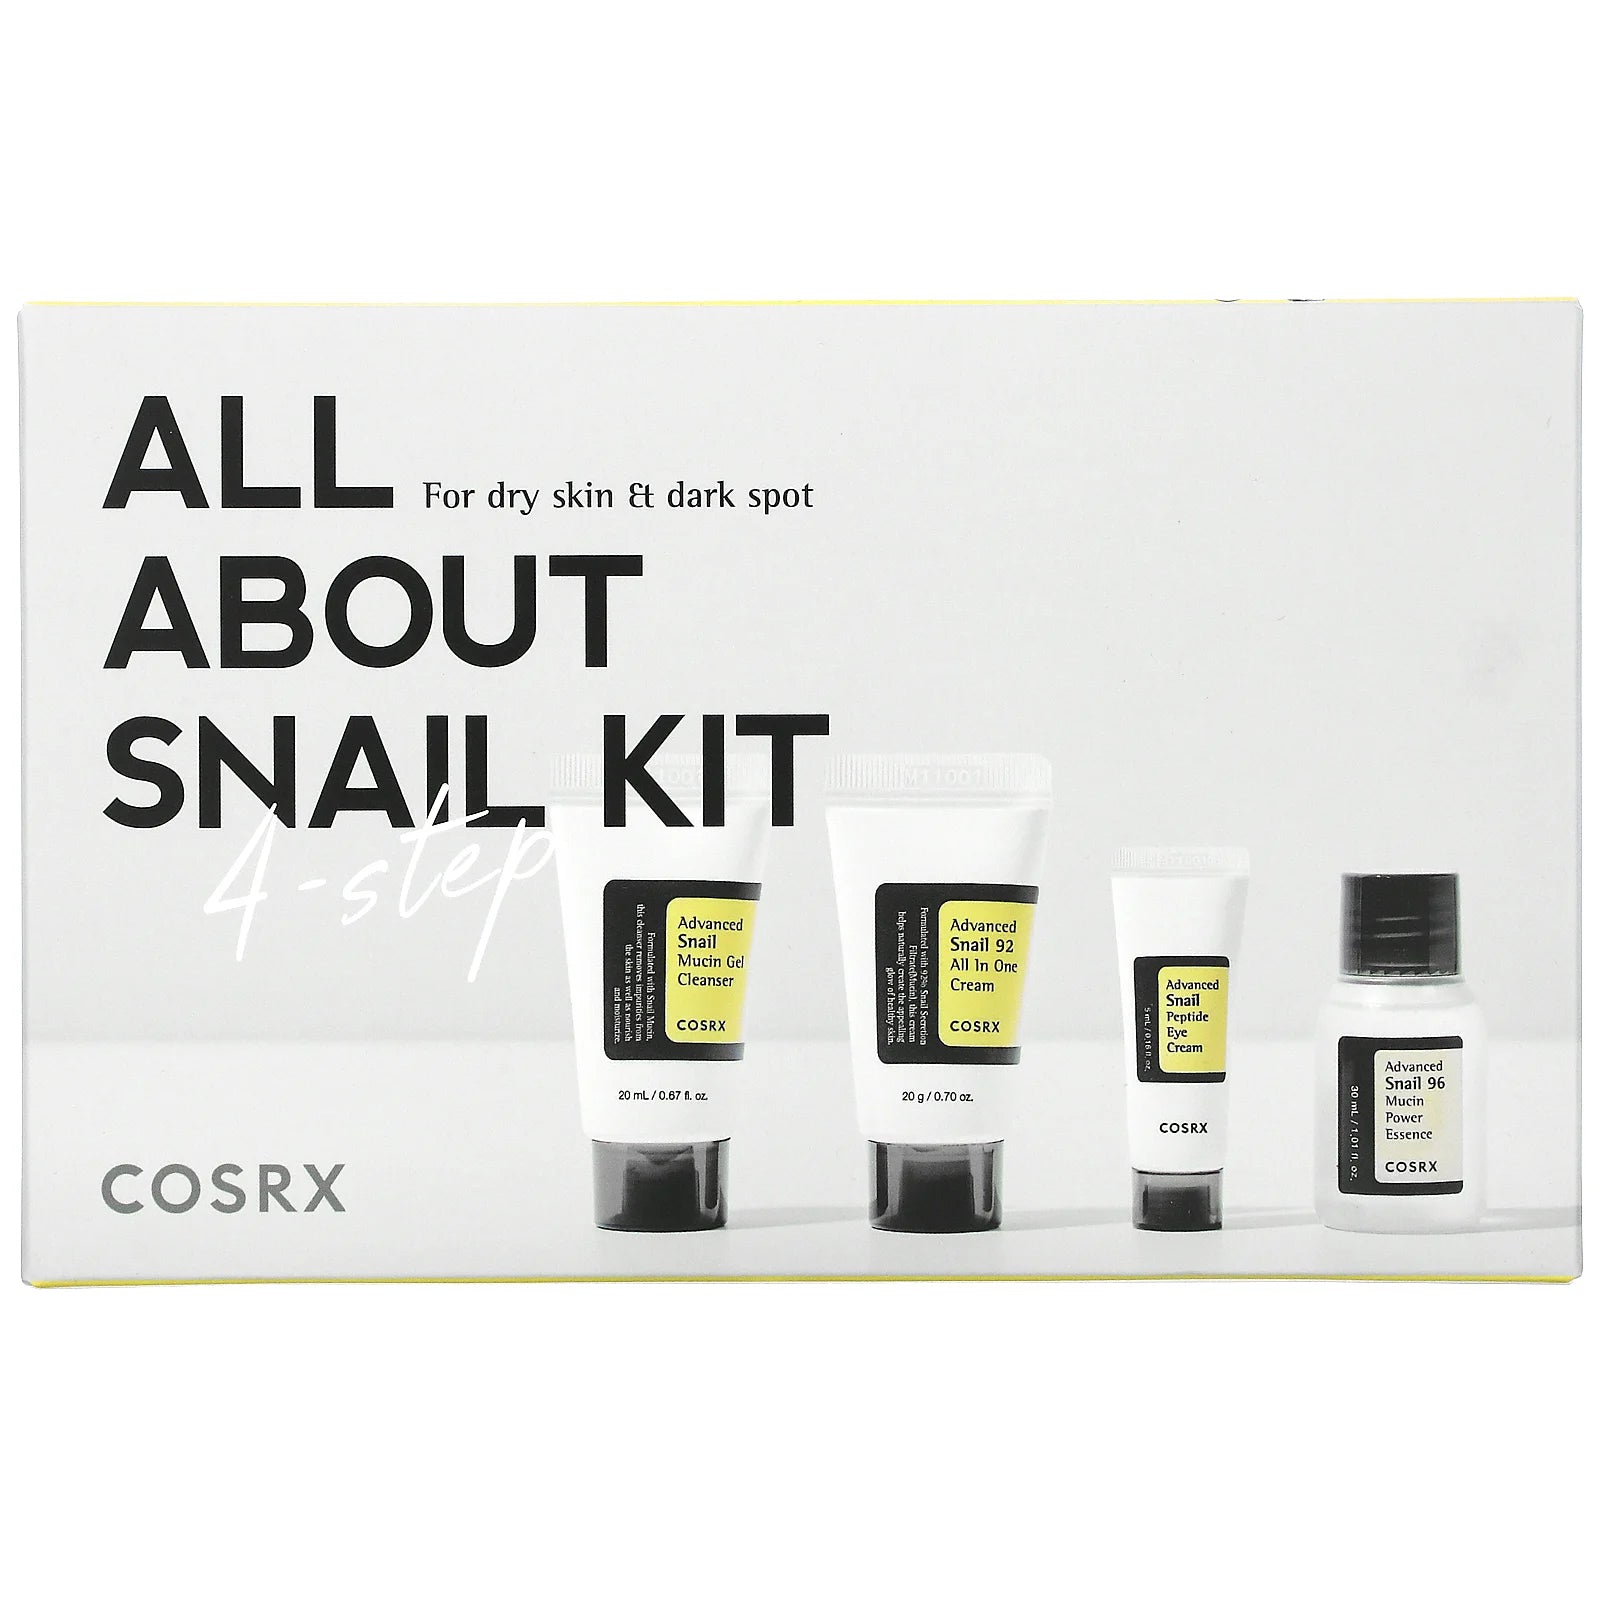 Cosrx - ALL ABOUT SNAIL KIT 4-Step